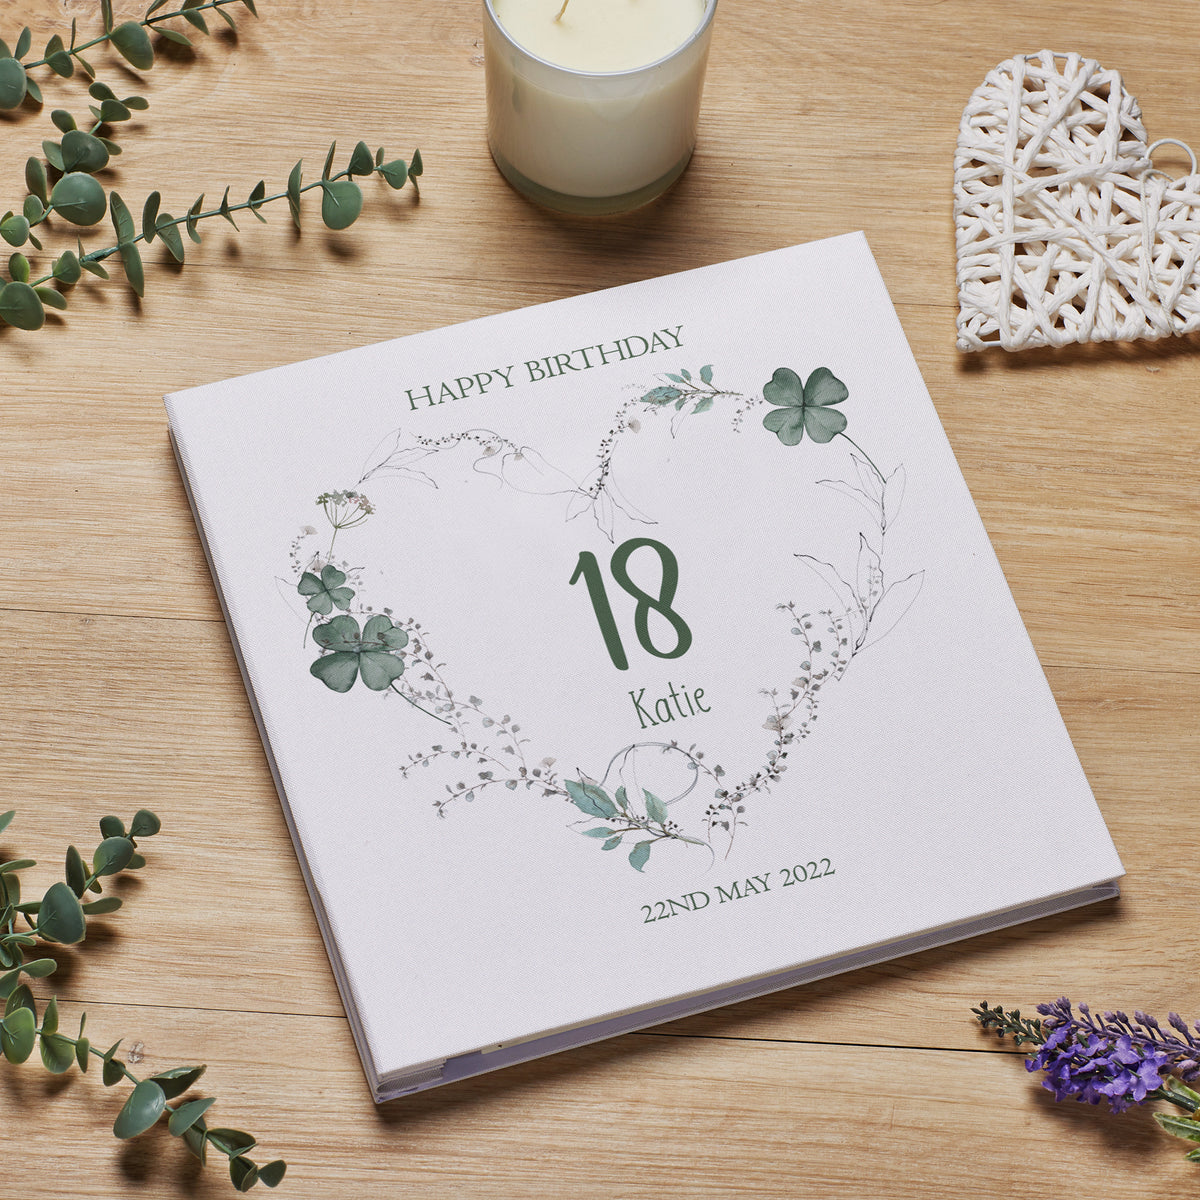 Personalised Large Birthday Photo Album Linen Cover Green Clover Heart